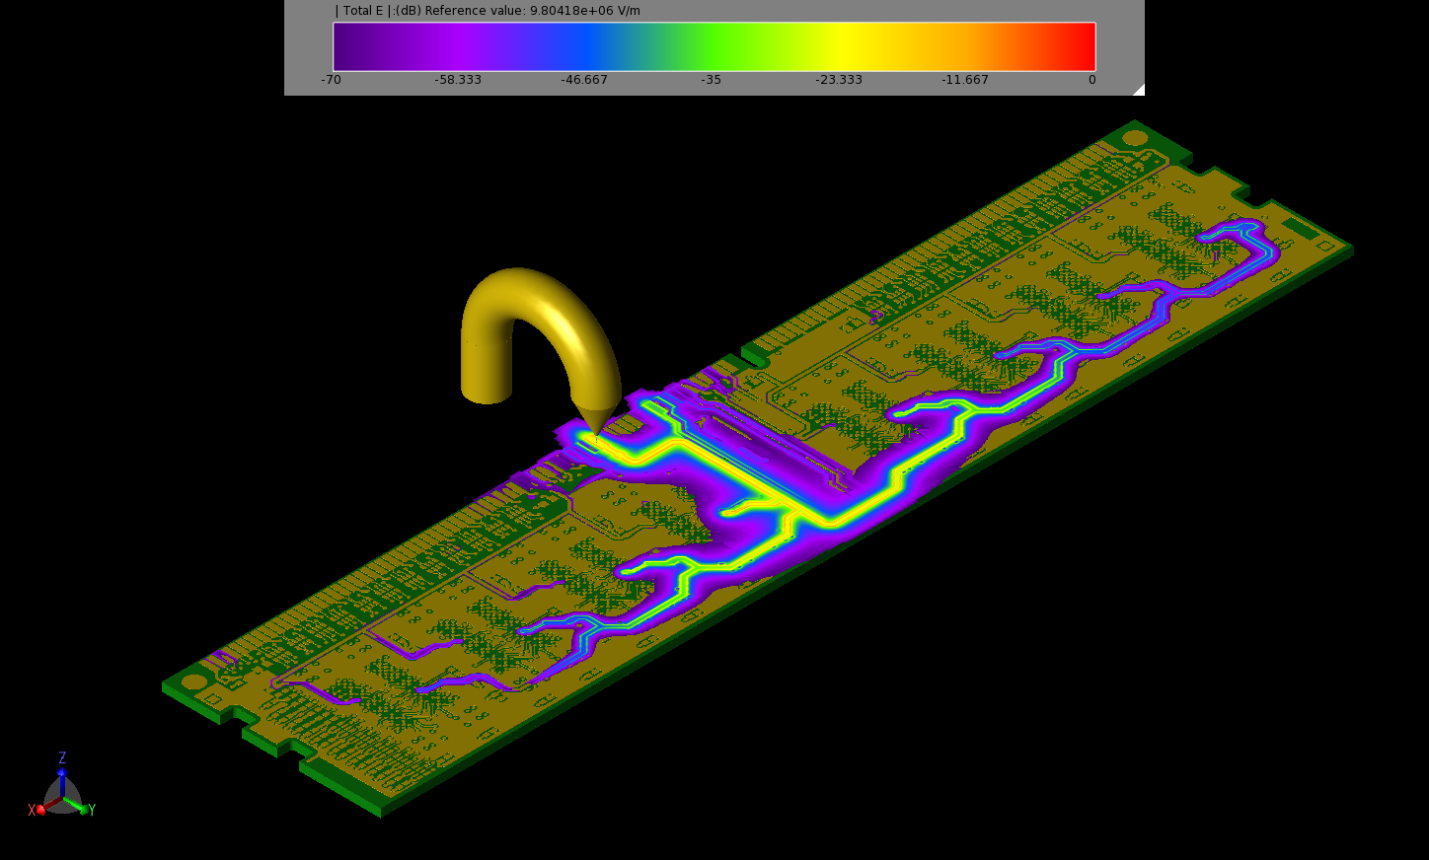 Figure 1: Electric fields during an ESD test of a DDR3 RAM stick. Source: Remcom